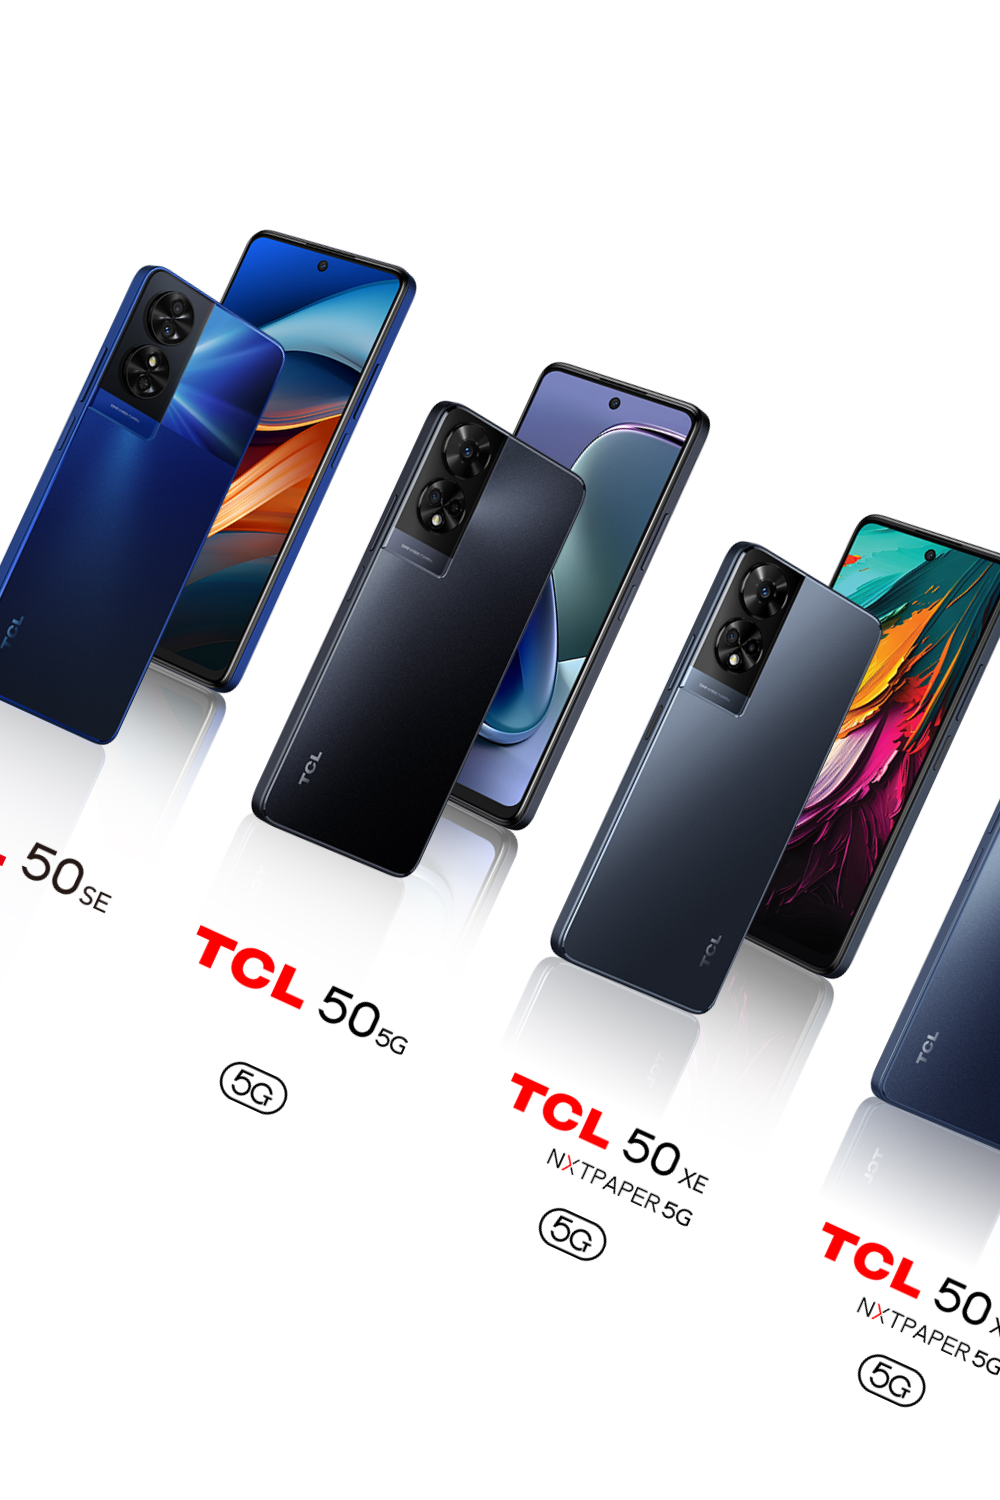 TCL 50 XL NXTPAPER 5G, 50 XE 5G, TCL NXTPAPER 14 and other mobile devices  debut